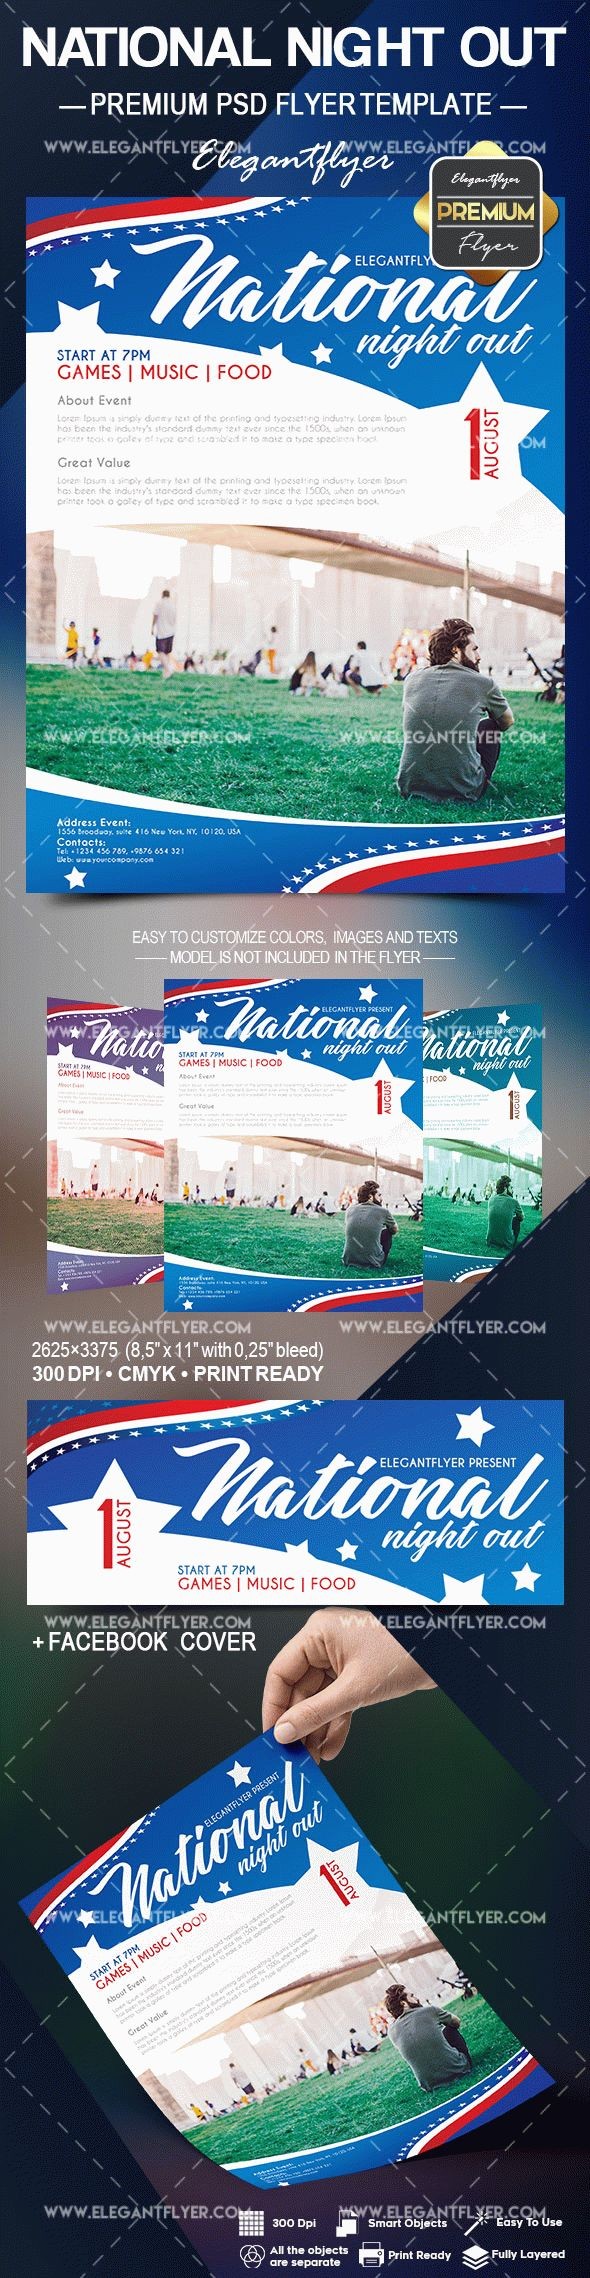 La Nuit nationale hors is a traditional event held in the United States and Canada. It aims to promote community involvement in crime prevention activities, strengthen neighborhood spirit, and enhance police-community partnerships. by ElegantFlyer